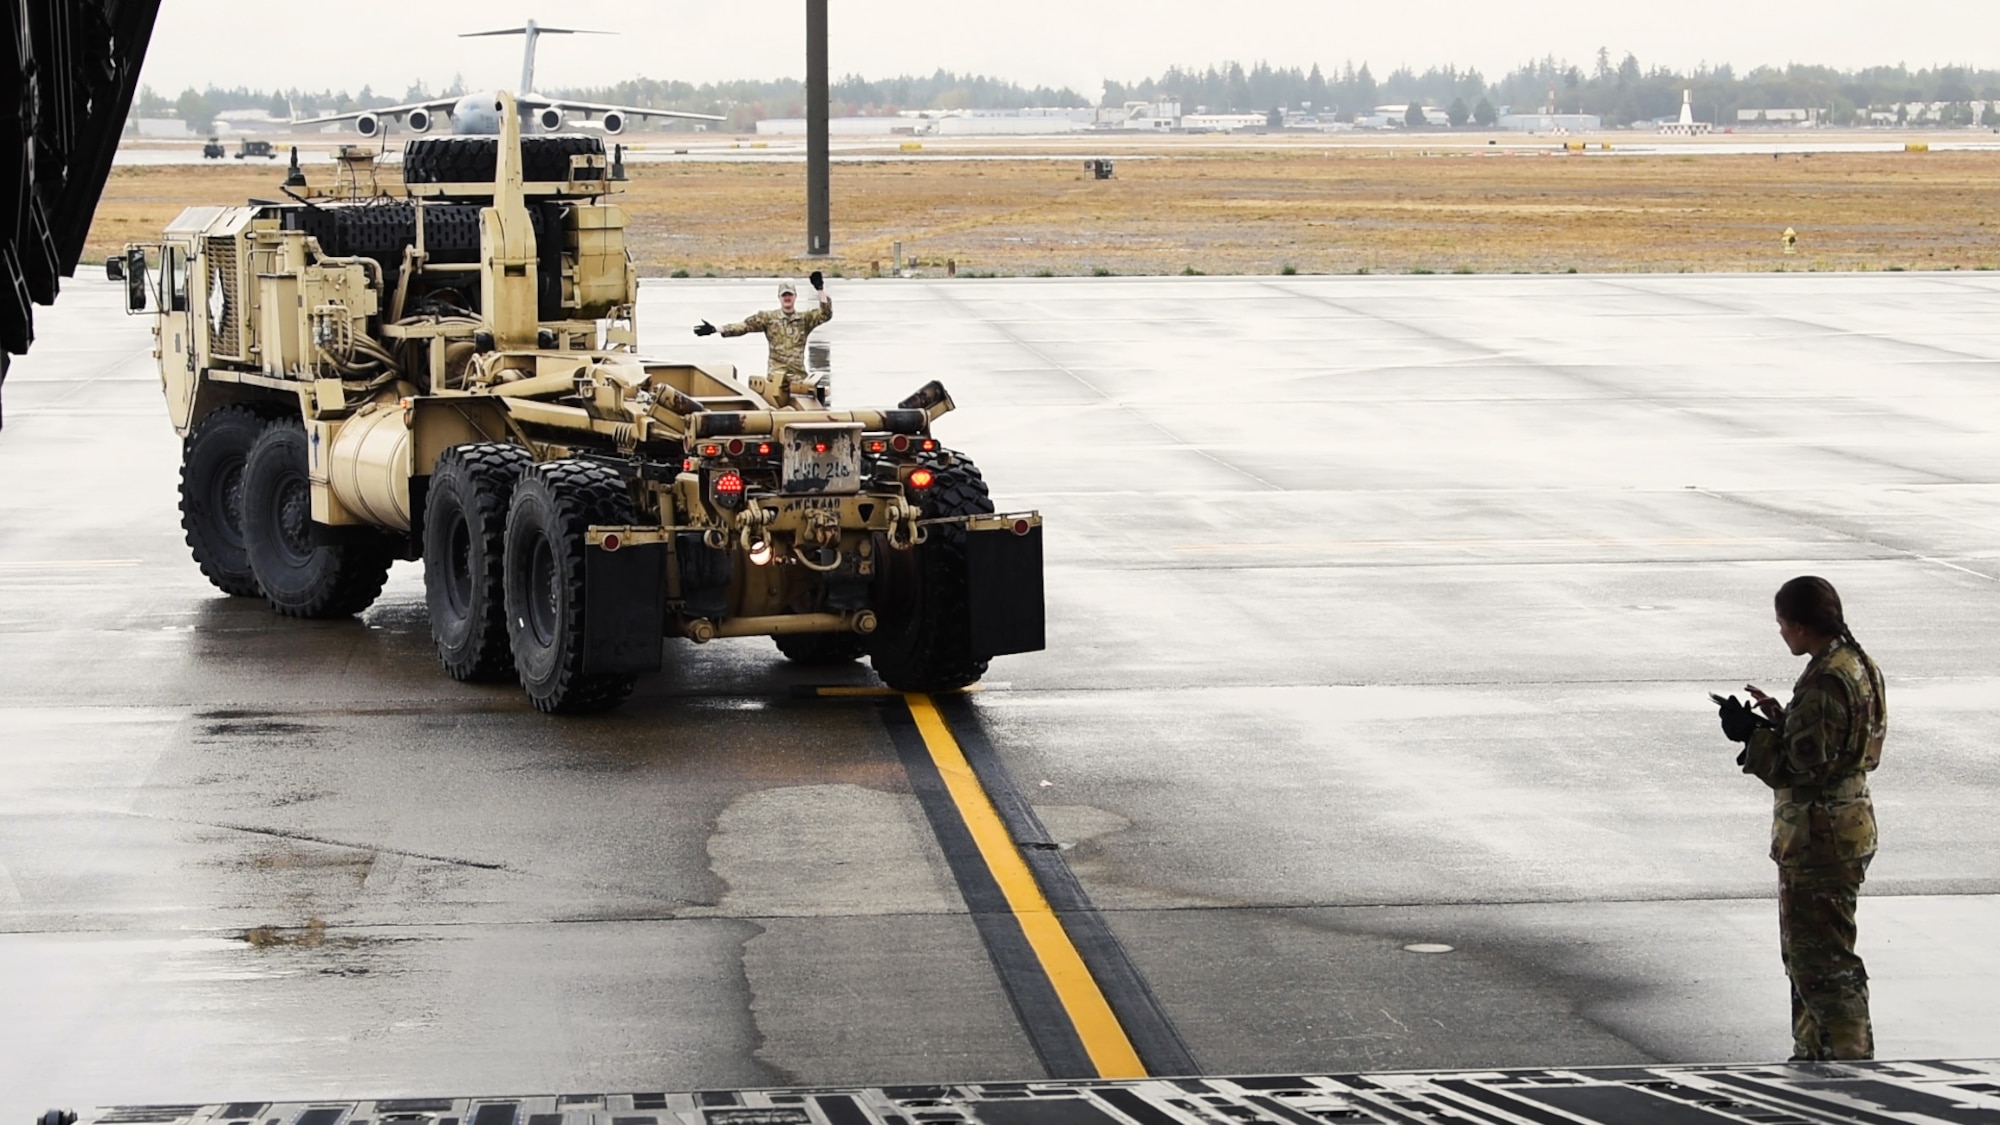 U.S. Air Force Airman 1st Class Vallery Stavish, right, and Senior Airman Kainoa Cook, center, both loadmasters with the 4th Expeditionary Airlift Squadron, guide a U.S. Army Heavy Expanded Mobility Tactical Truck onto a C-17A Globemaster III during Exercise Rainier War 23A at Joint Base Lewis-McChord, Washington, Sept. 20, 2023. The 4th EAS trained alongside U.S. Soldiers from the 555th Engineer Brigade at JBLM, Washington, to upload military vehicles onboard a C-17, as well as how to secure the vehicles during flights. Rainier War is an annual exercise led by the 62d Airlift Wing designed to evaluate the ability to generate, employ and sustain in-garrison and forward deployed forces. (U.S. Air Force photo by Staff Sgt. Zoe Thacker)